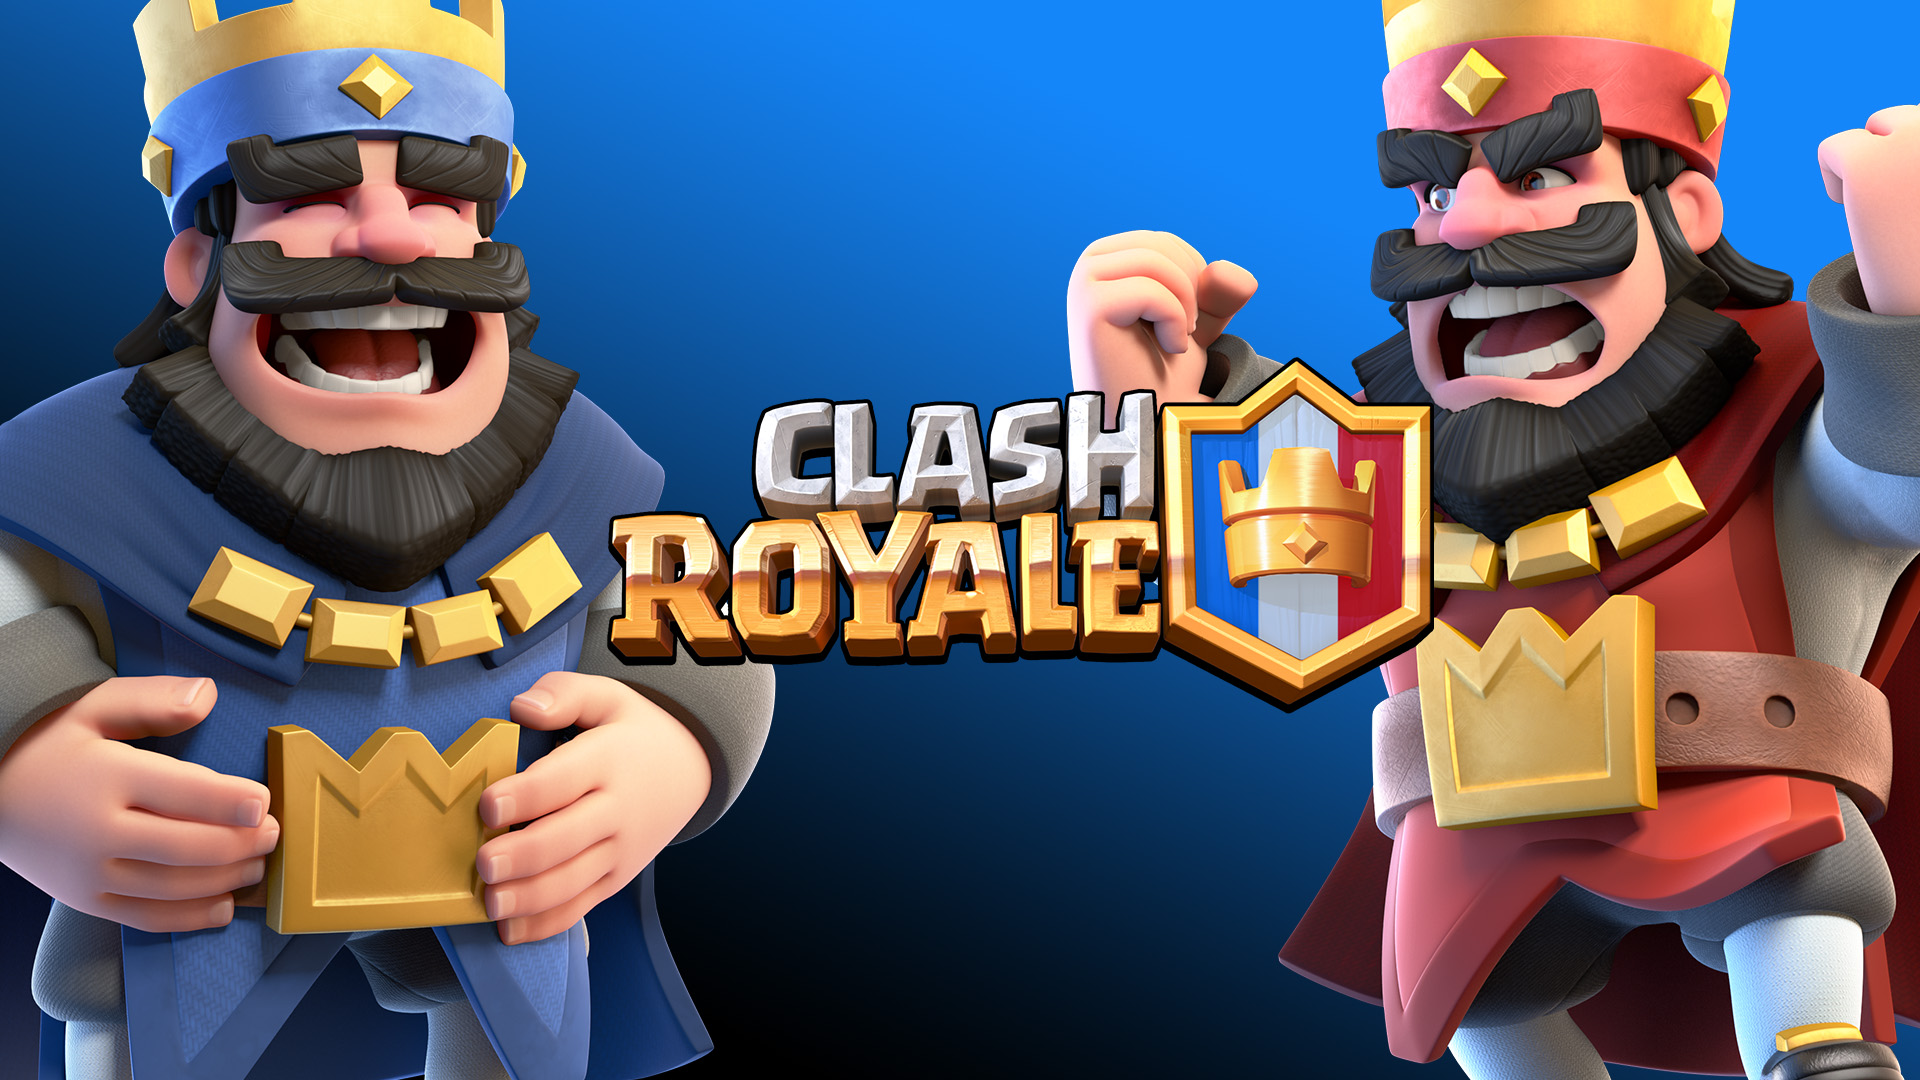 Video Game Clash Royale 1920x1080